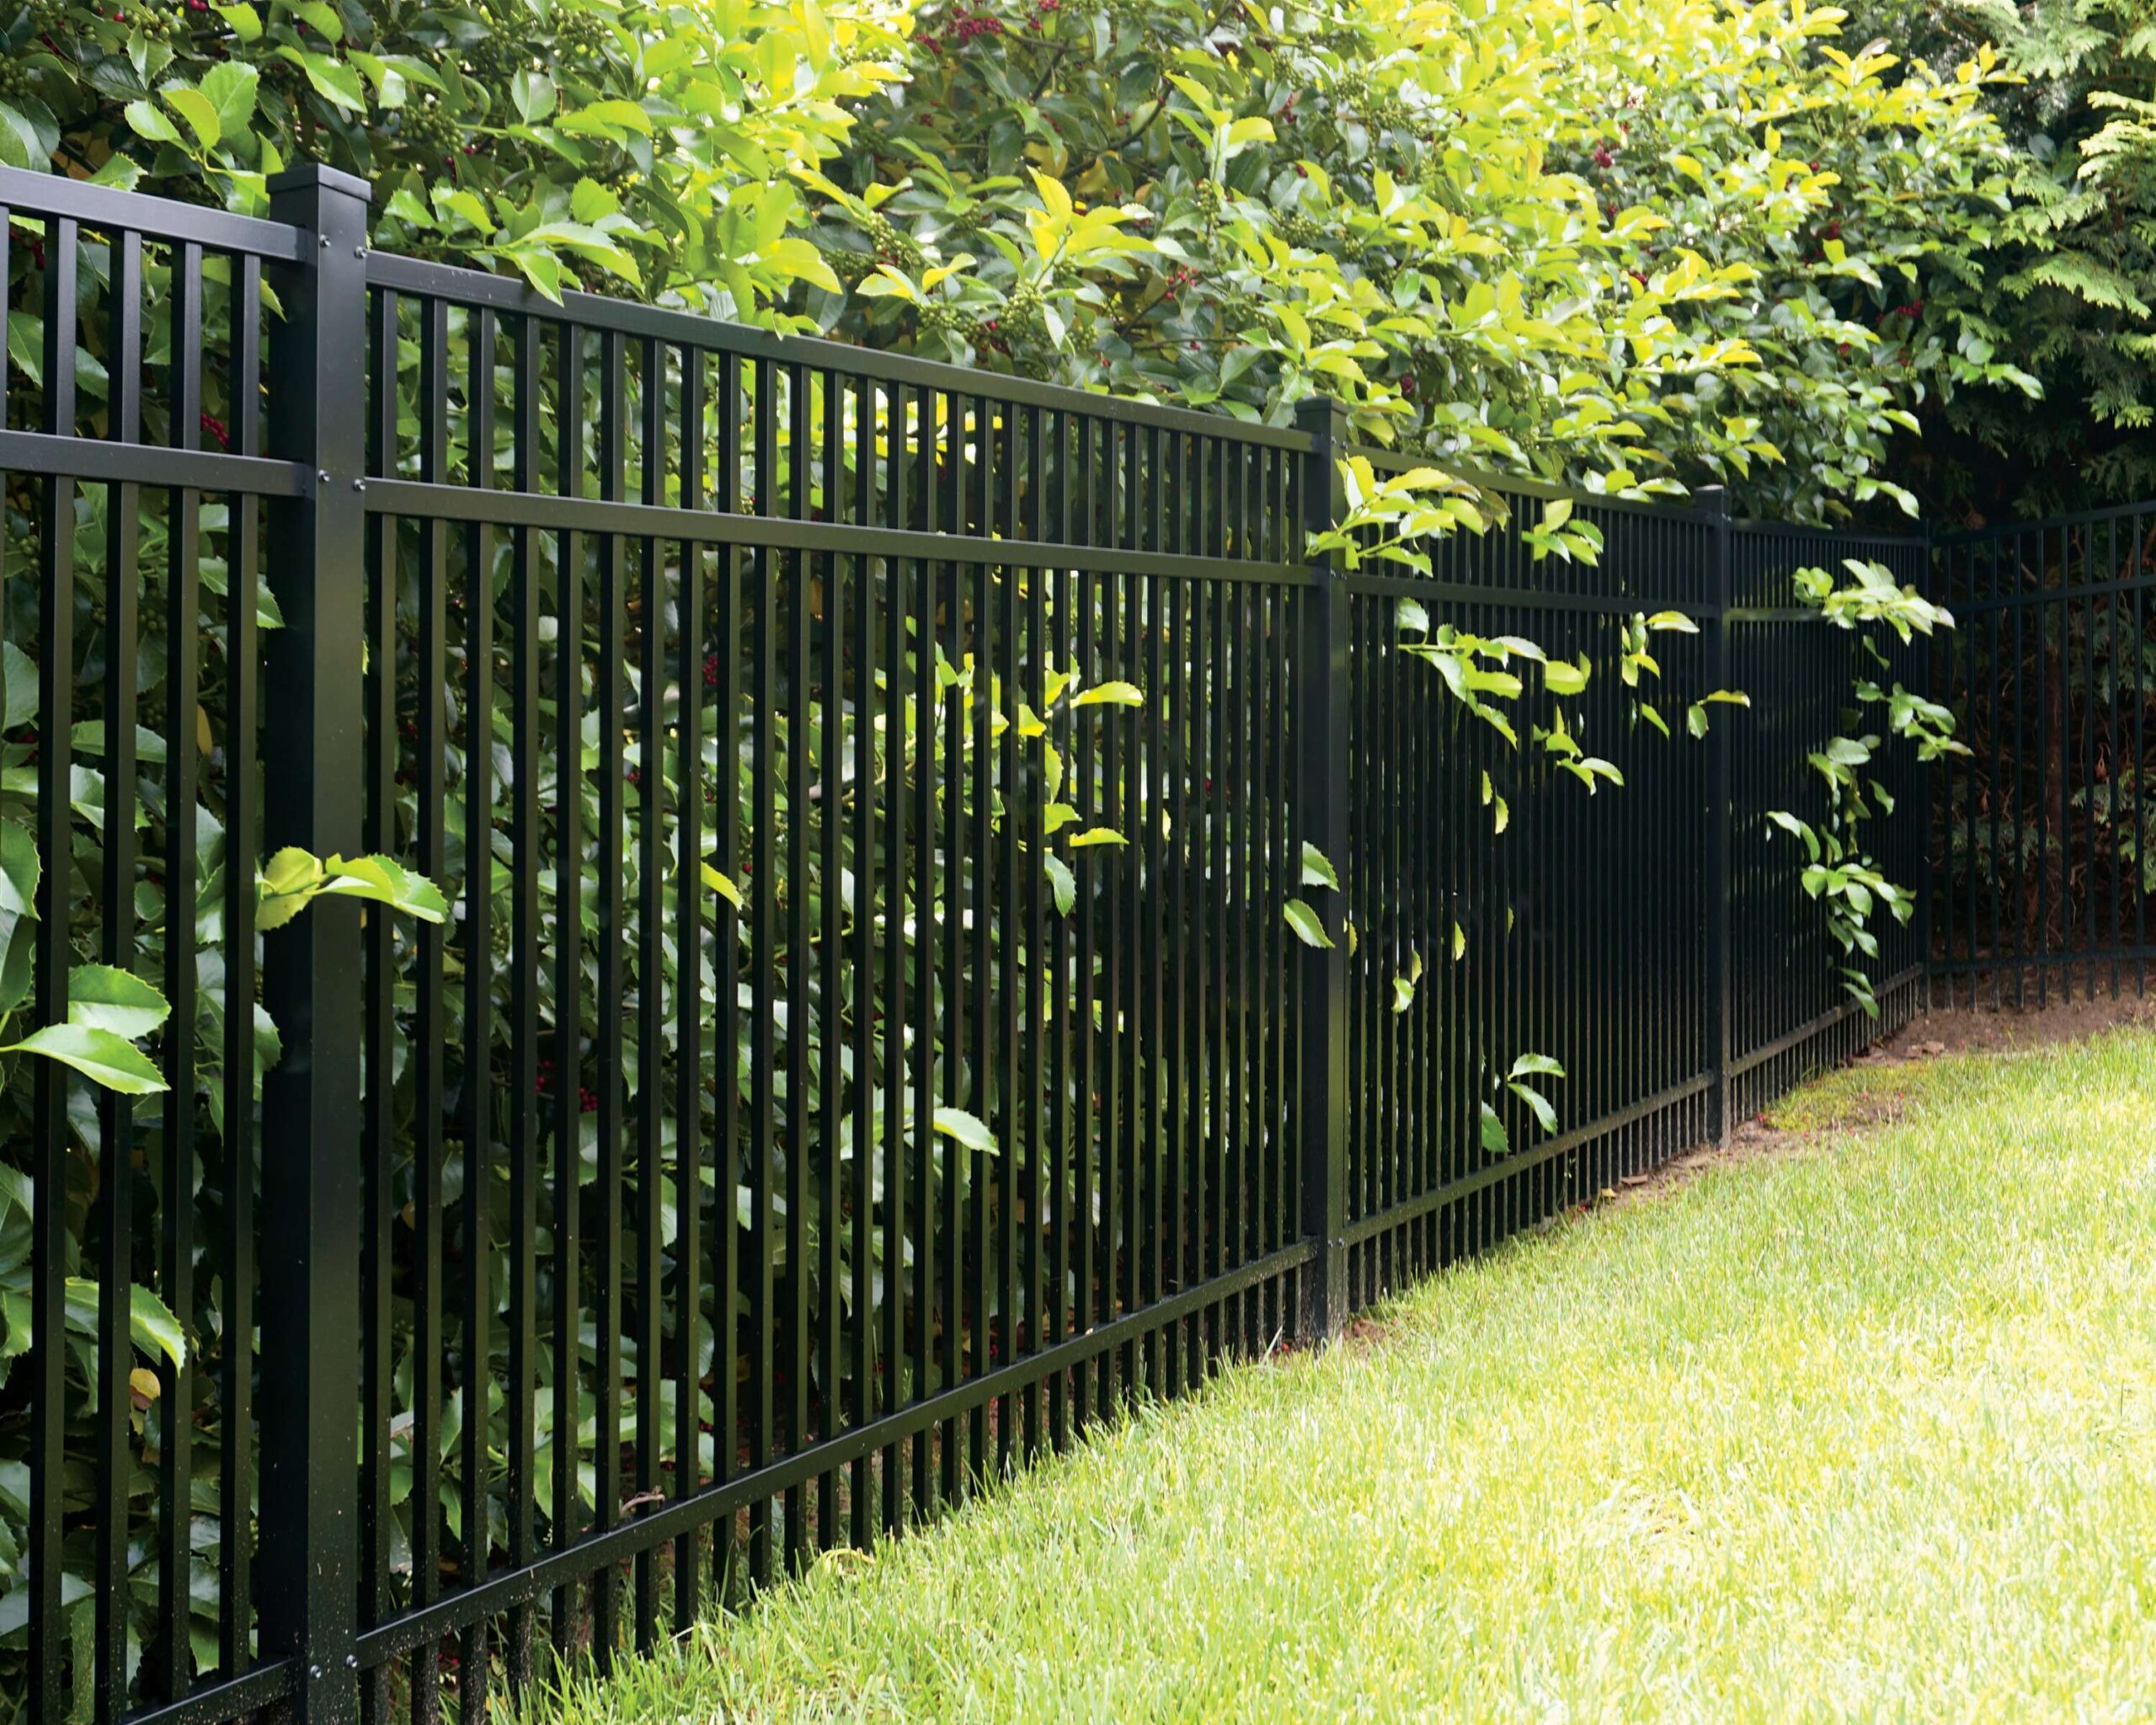 A typical backdoor setting with green manicured grass and an Active Yards Granite aluminum fence keeping nature at bay